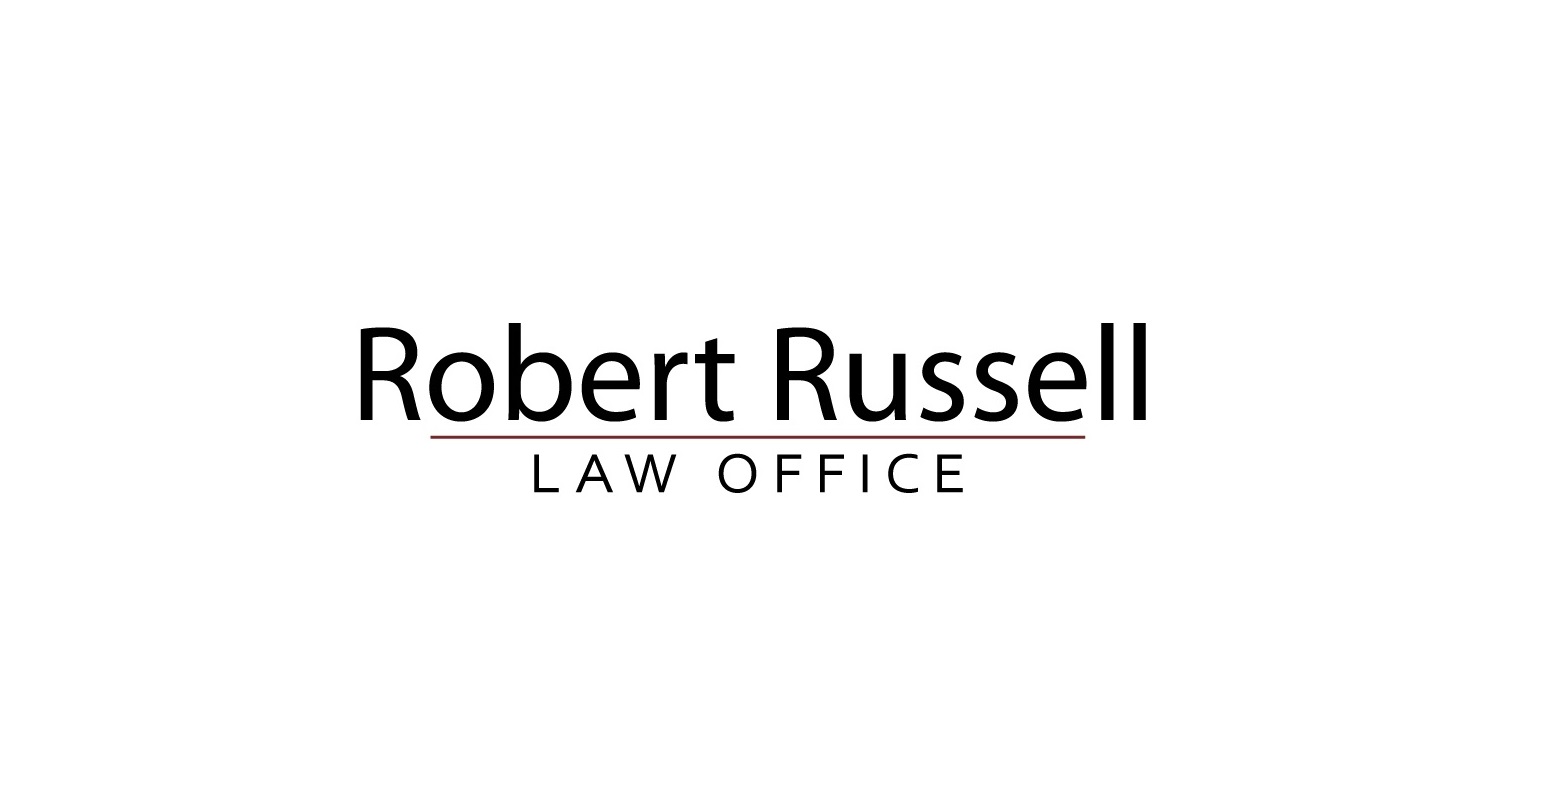 Robert Russell Law Office Profile Picture